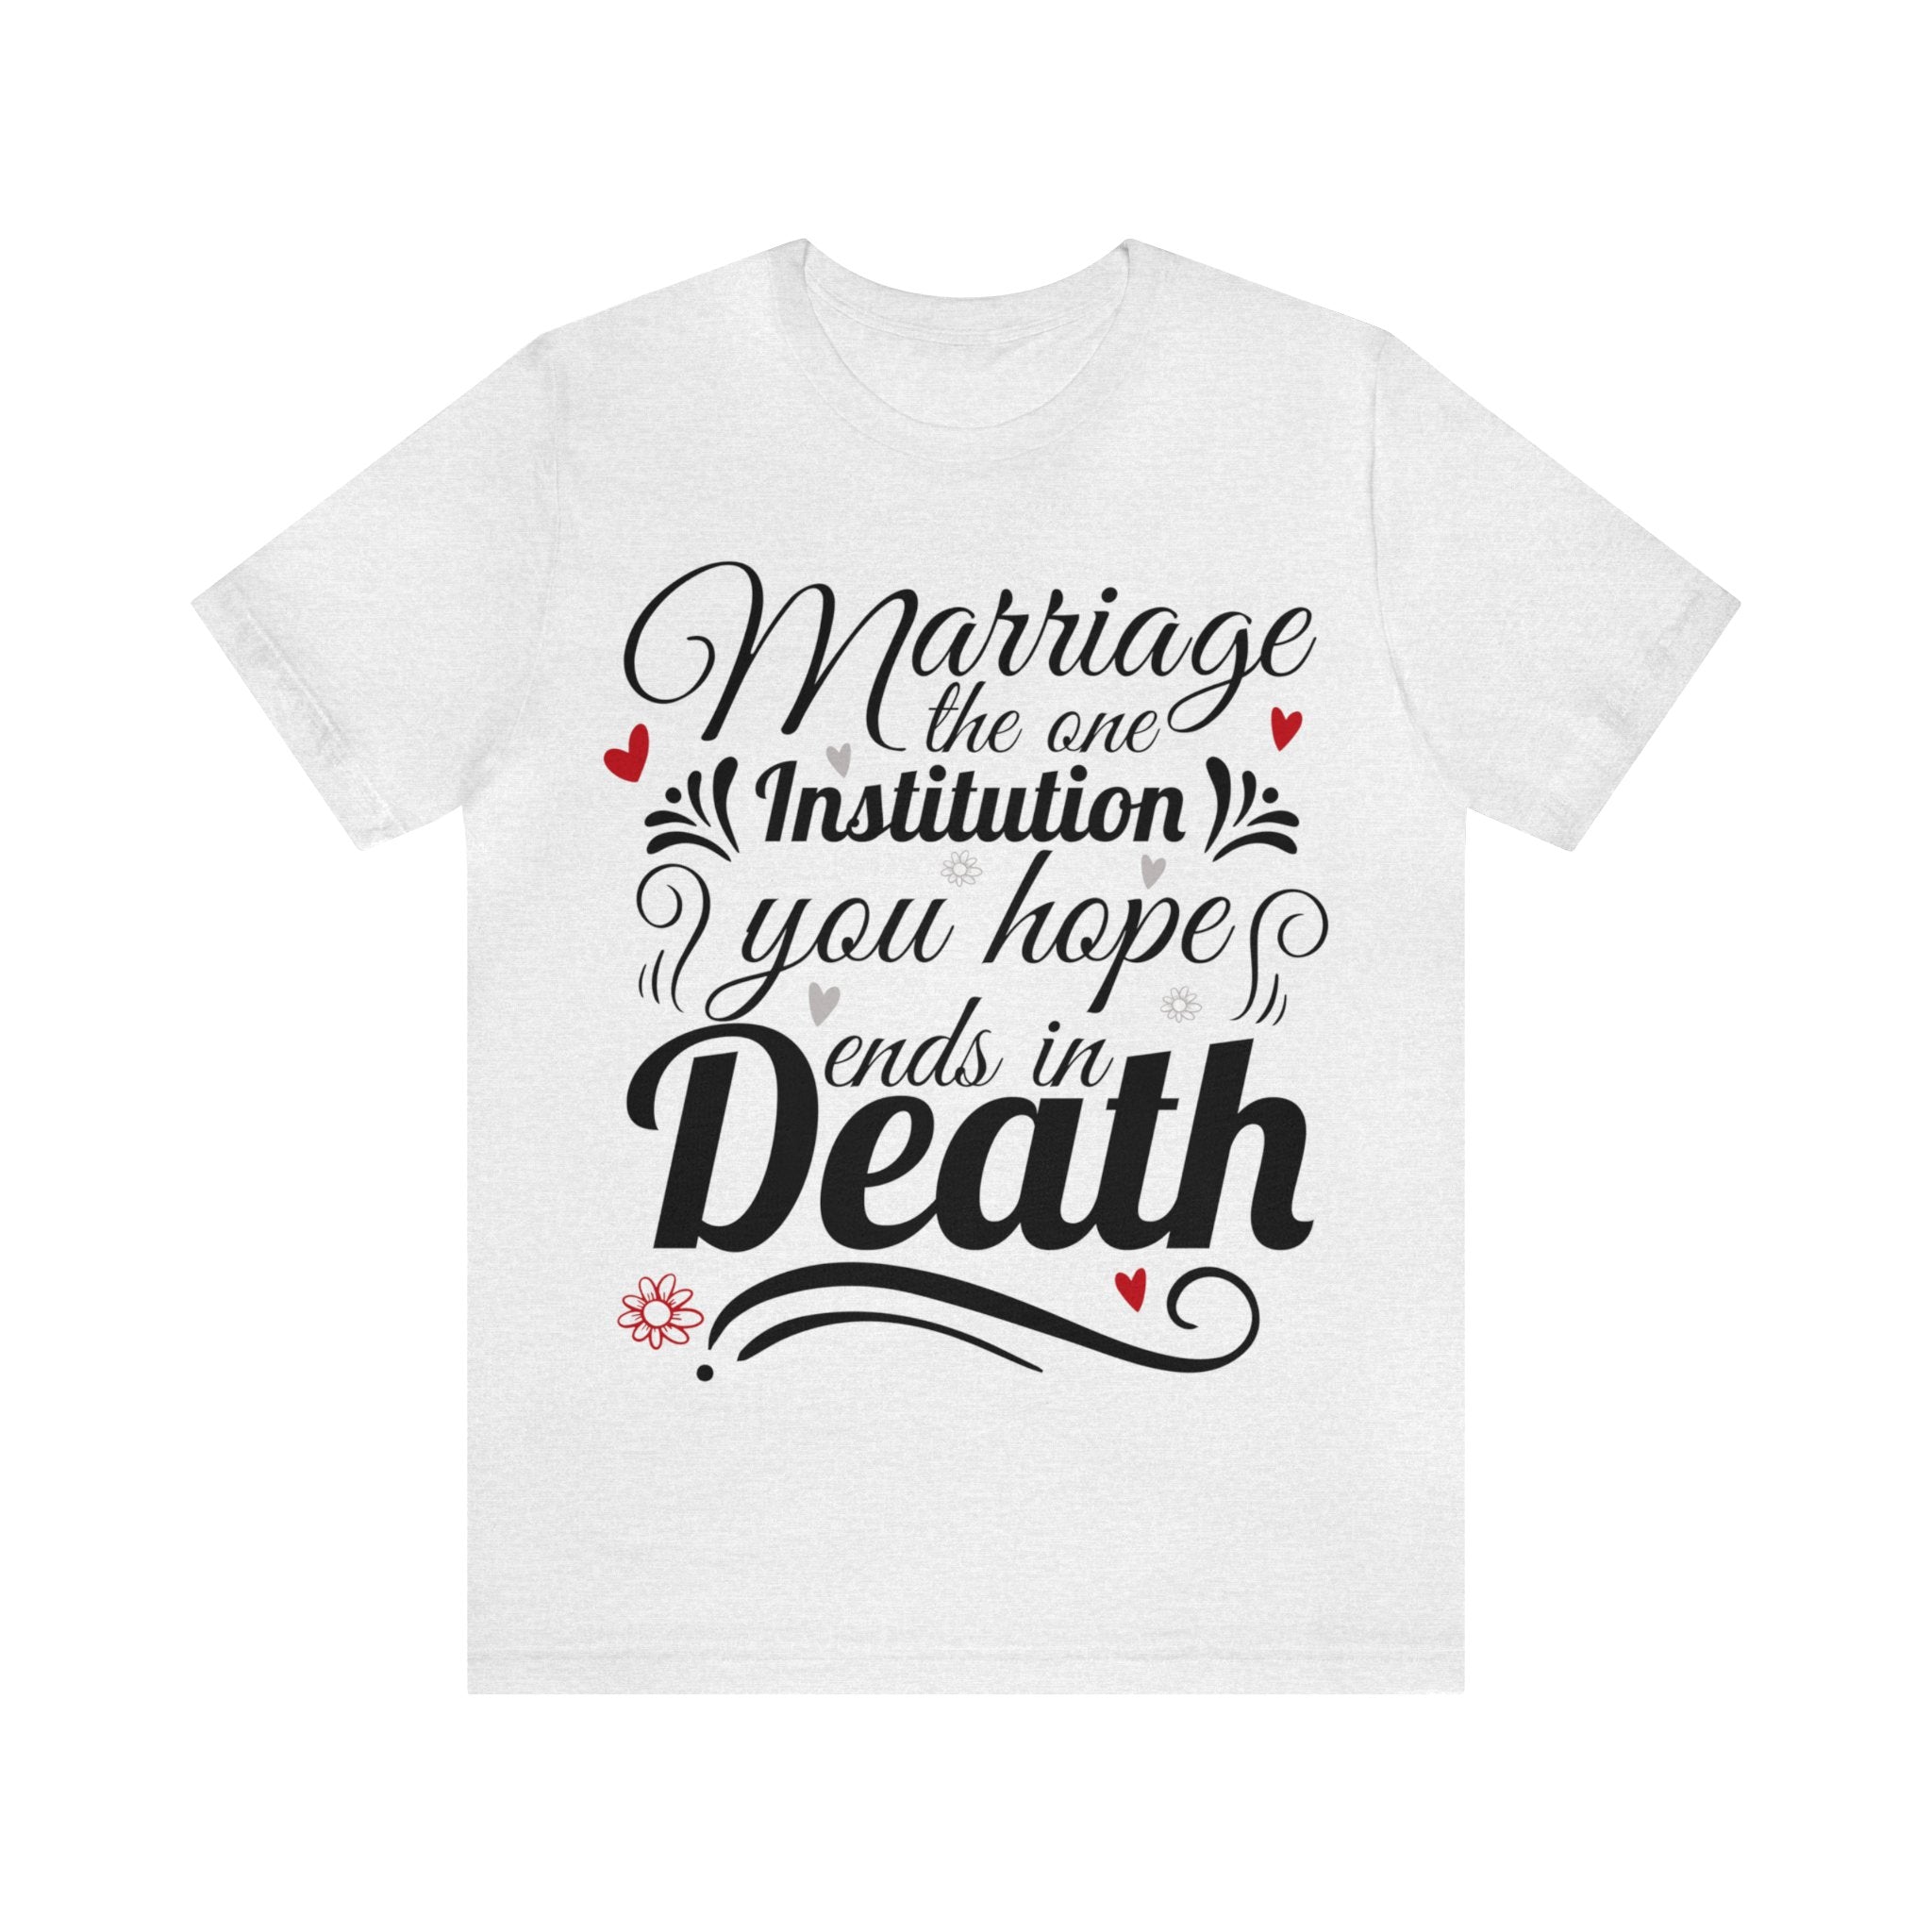 Marriage - One Institution You Hope Ends in Death